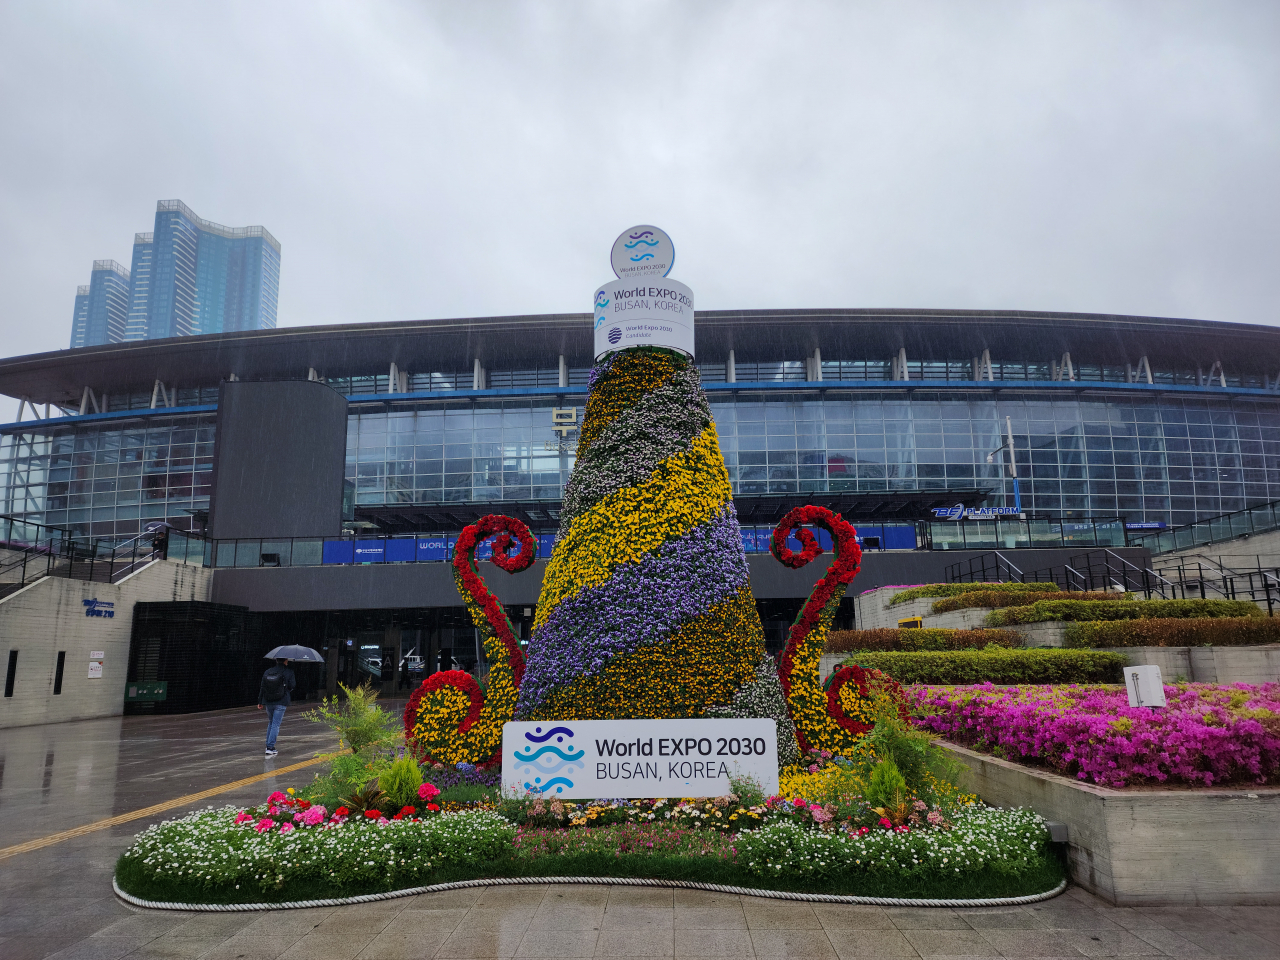 A flower display adorned with posters promoting the country's bid to host the 2030 World Expo is exhibited in front of Busan Station, Wednesday. (Lee Yoon-seo/The Korea Herald)